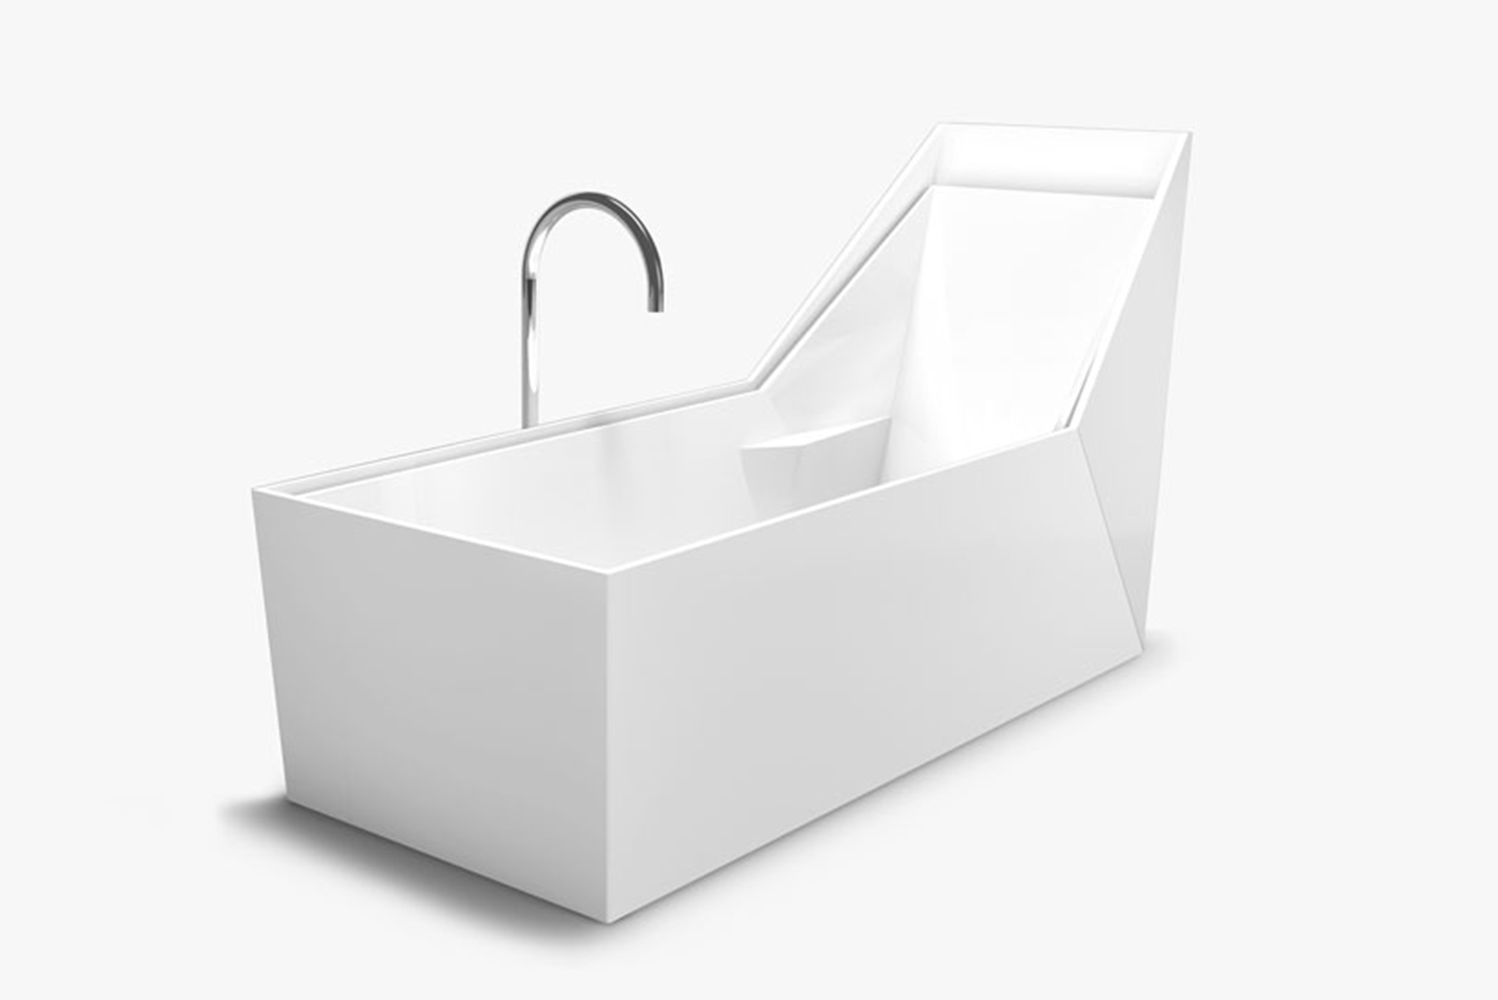 The Sampan collection was developed in collaboration with international design firm WOHA 